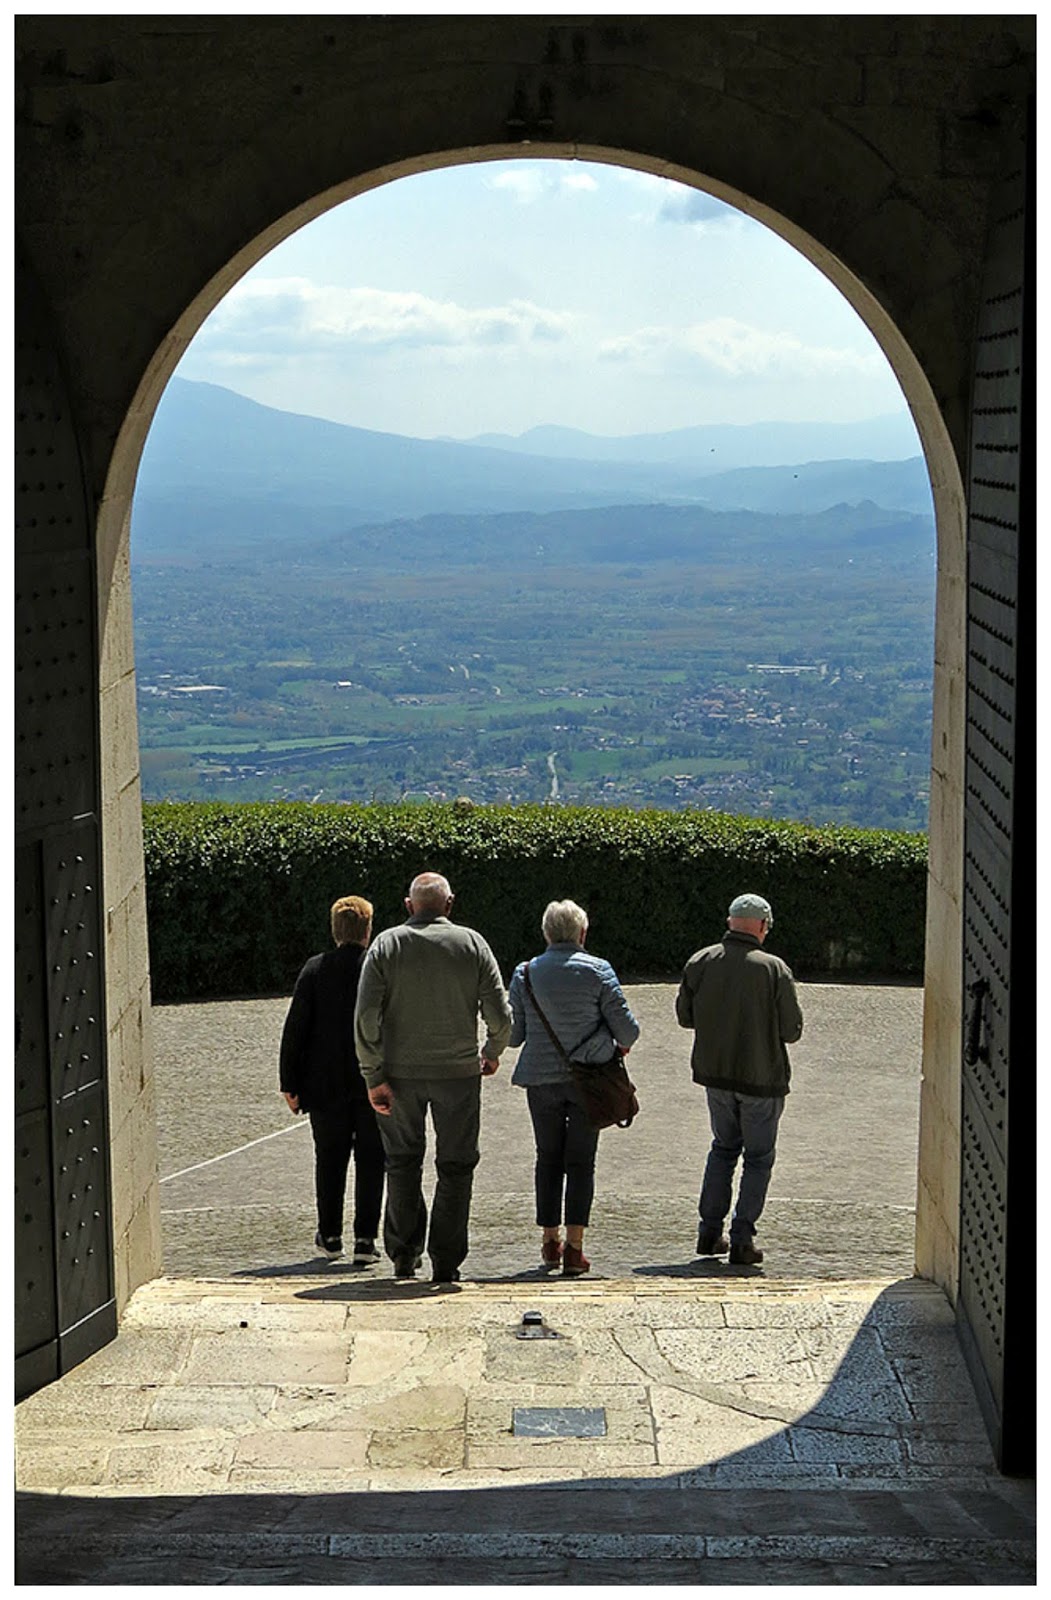 In Soul Grand Tour of Italy Montecassino pic